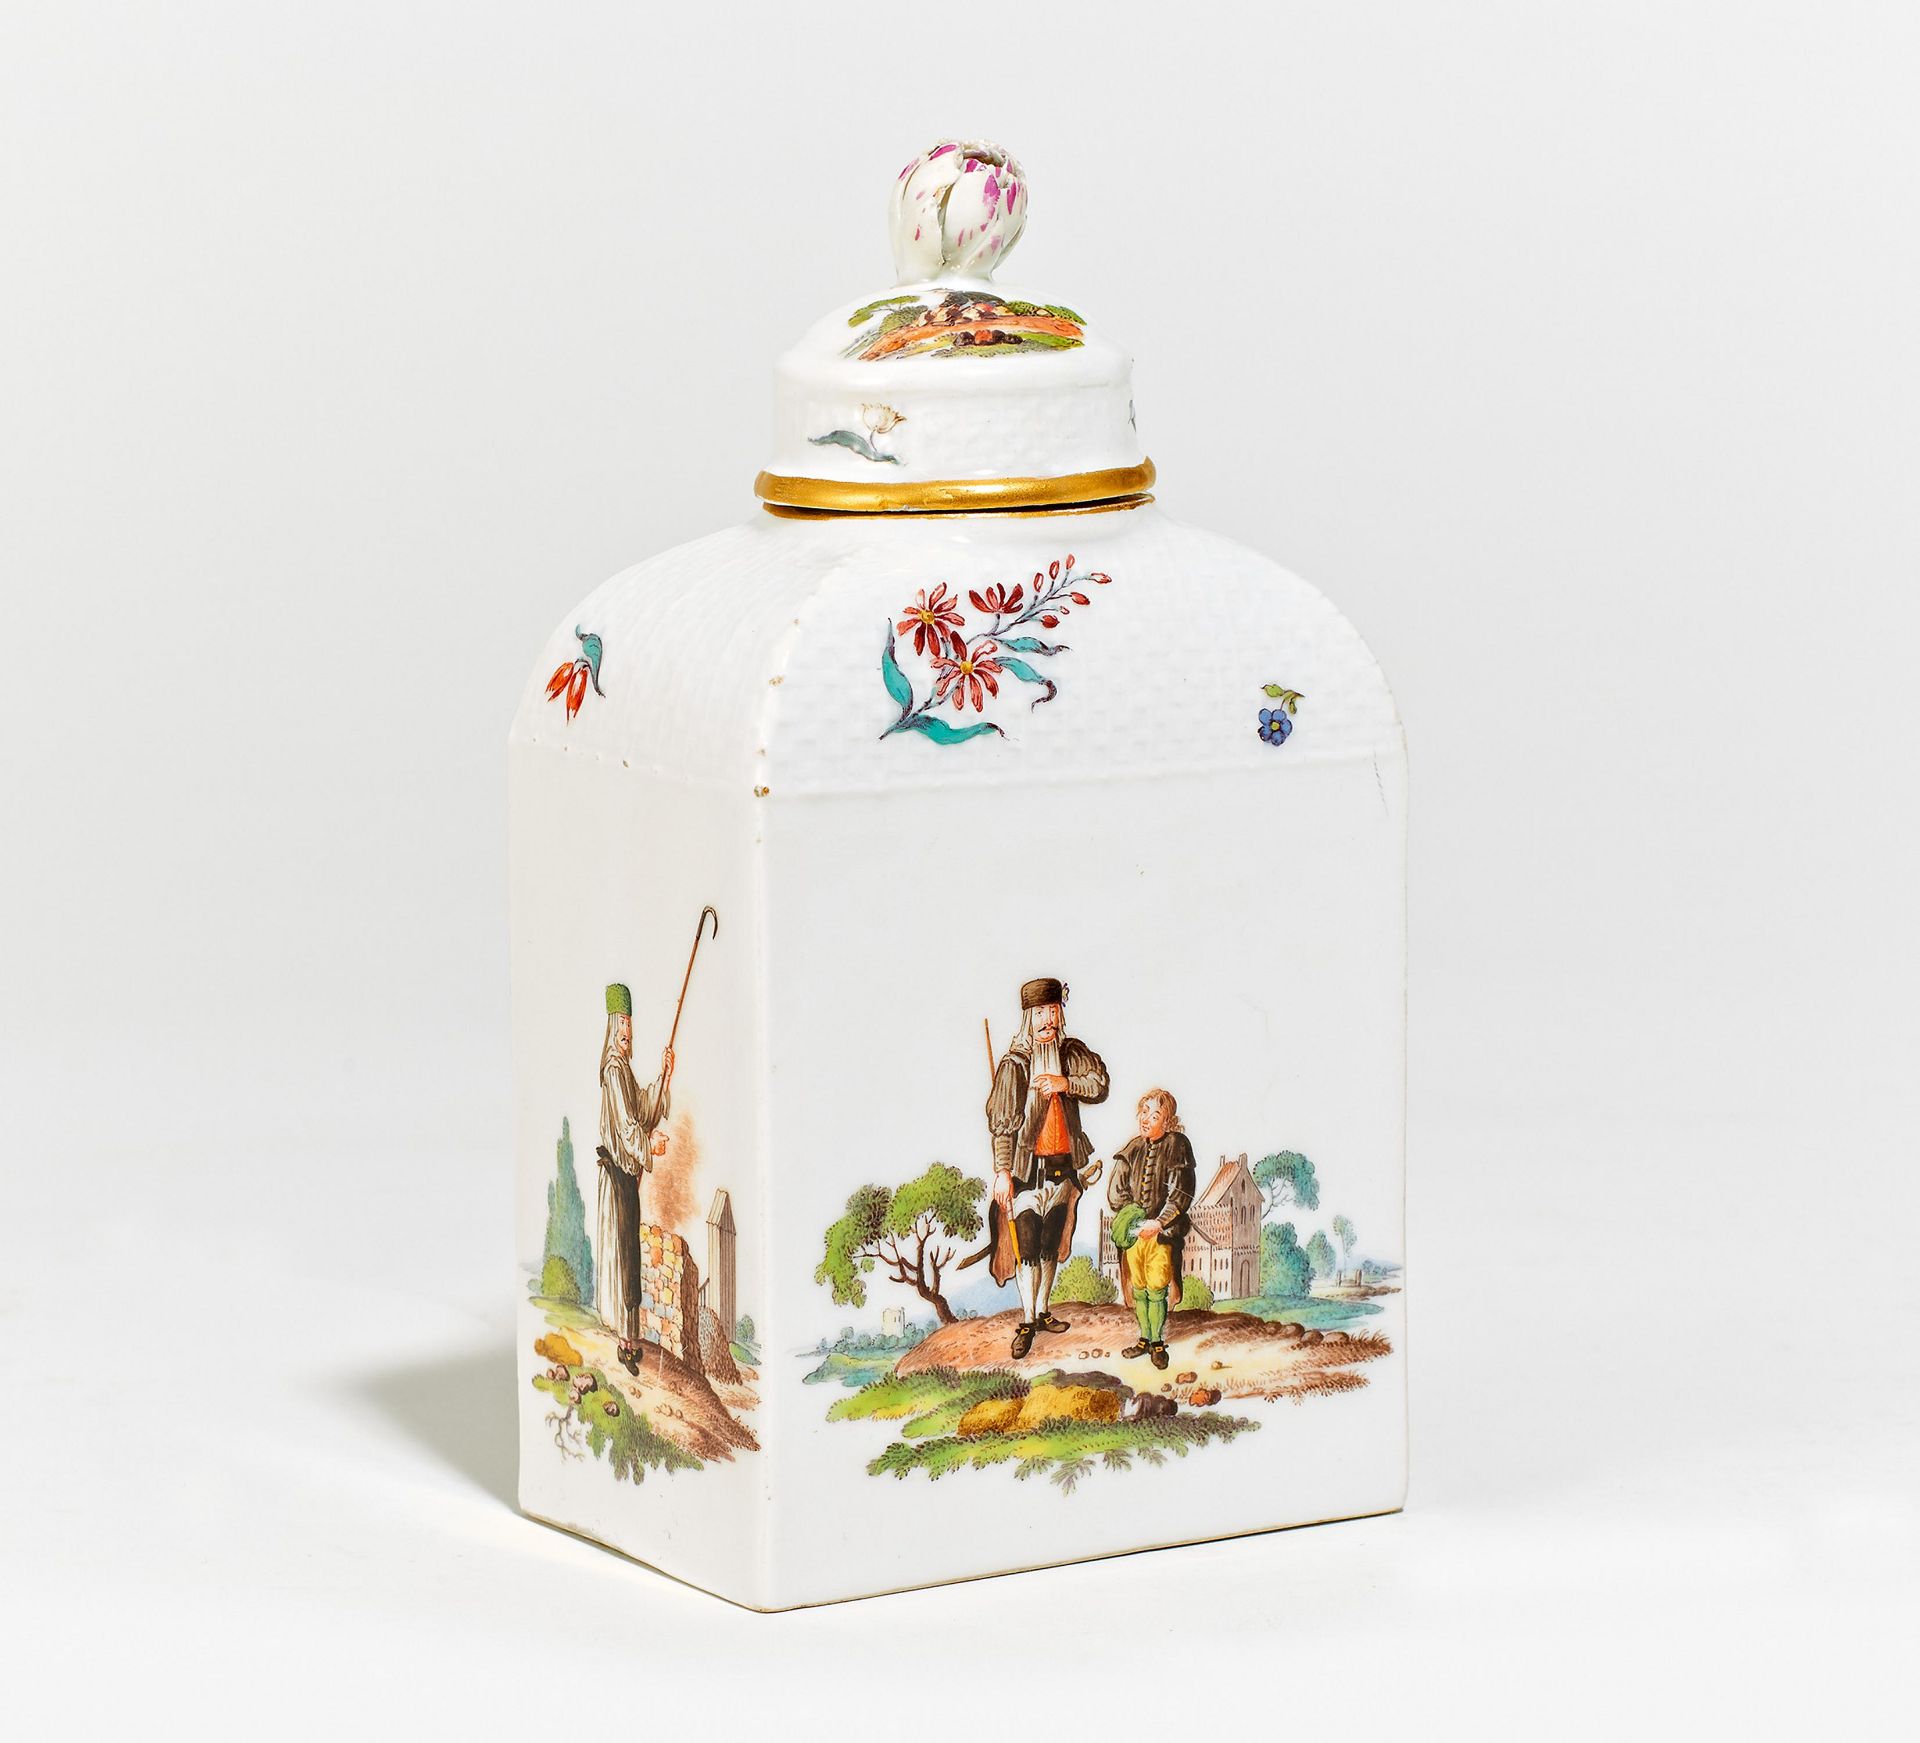 PORCELAIN TEA CADDY DEPICTING MINING SUBJECTS. Presumably Meissen. Date: 19th century. Technique: